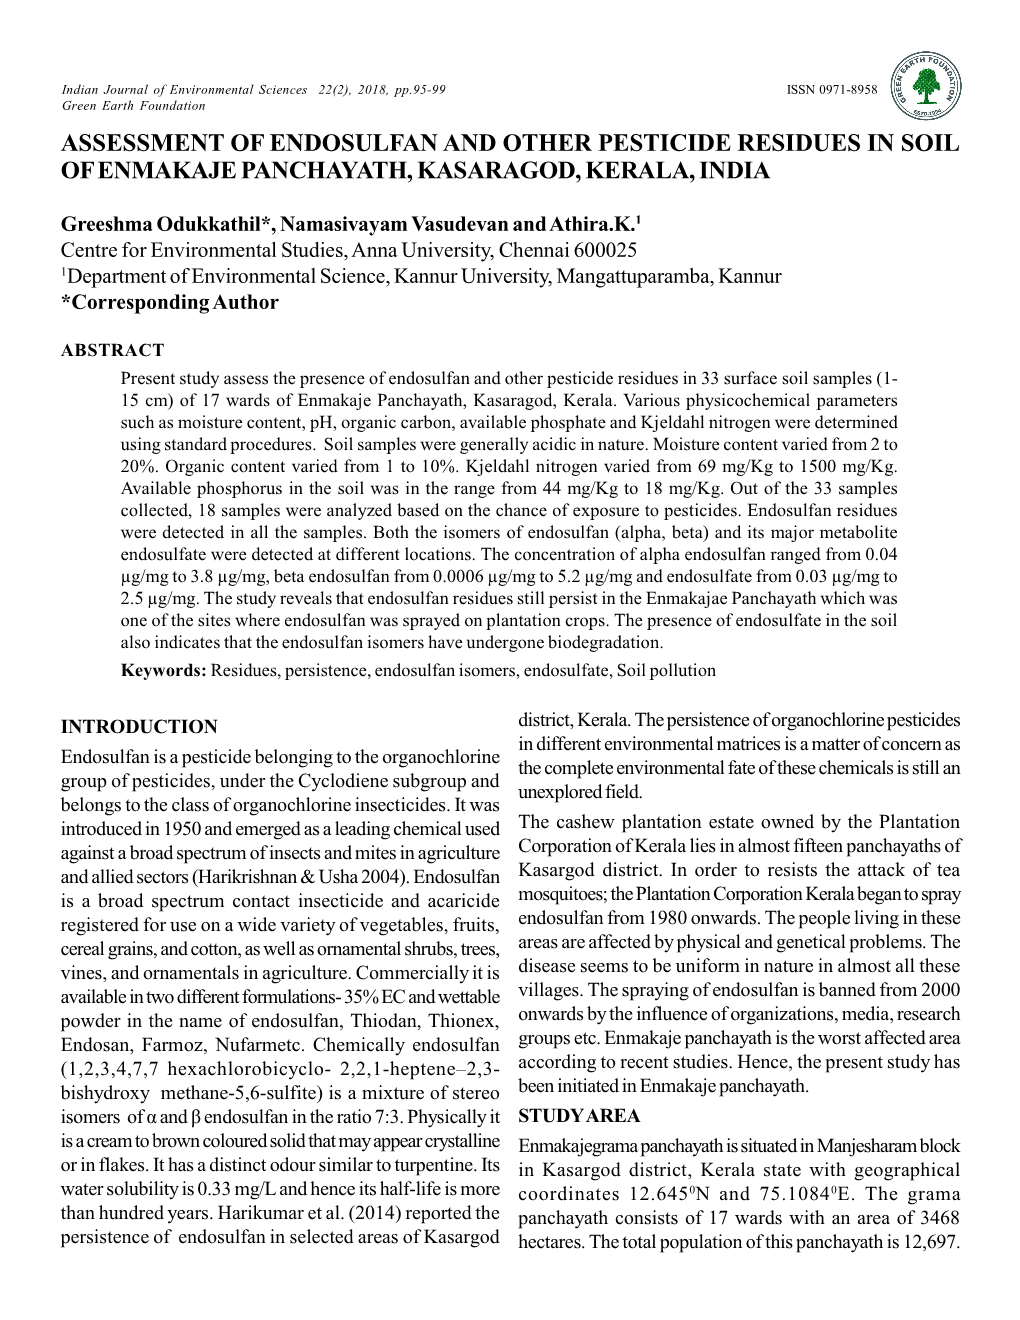 Assessment of Endosulfan and Other Pesticide Residues in Soil of Enmakaje Panchayath, Kasaragod, Kerala, India